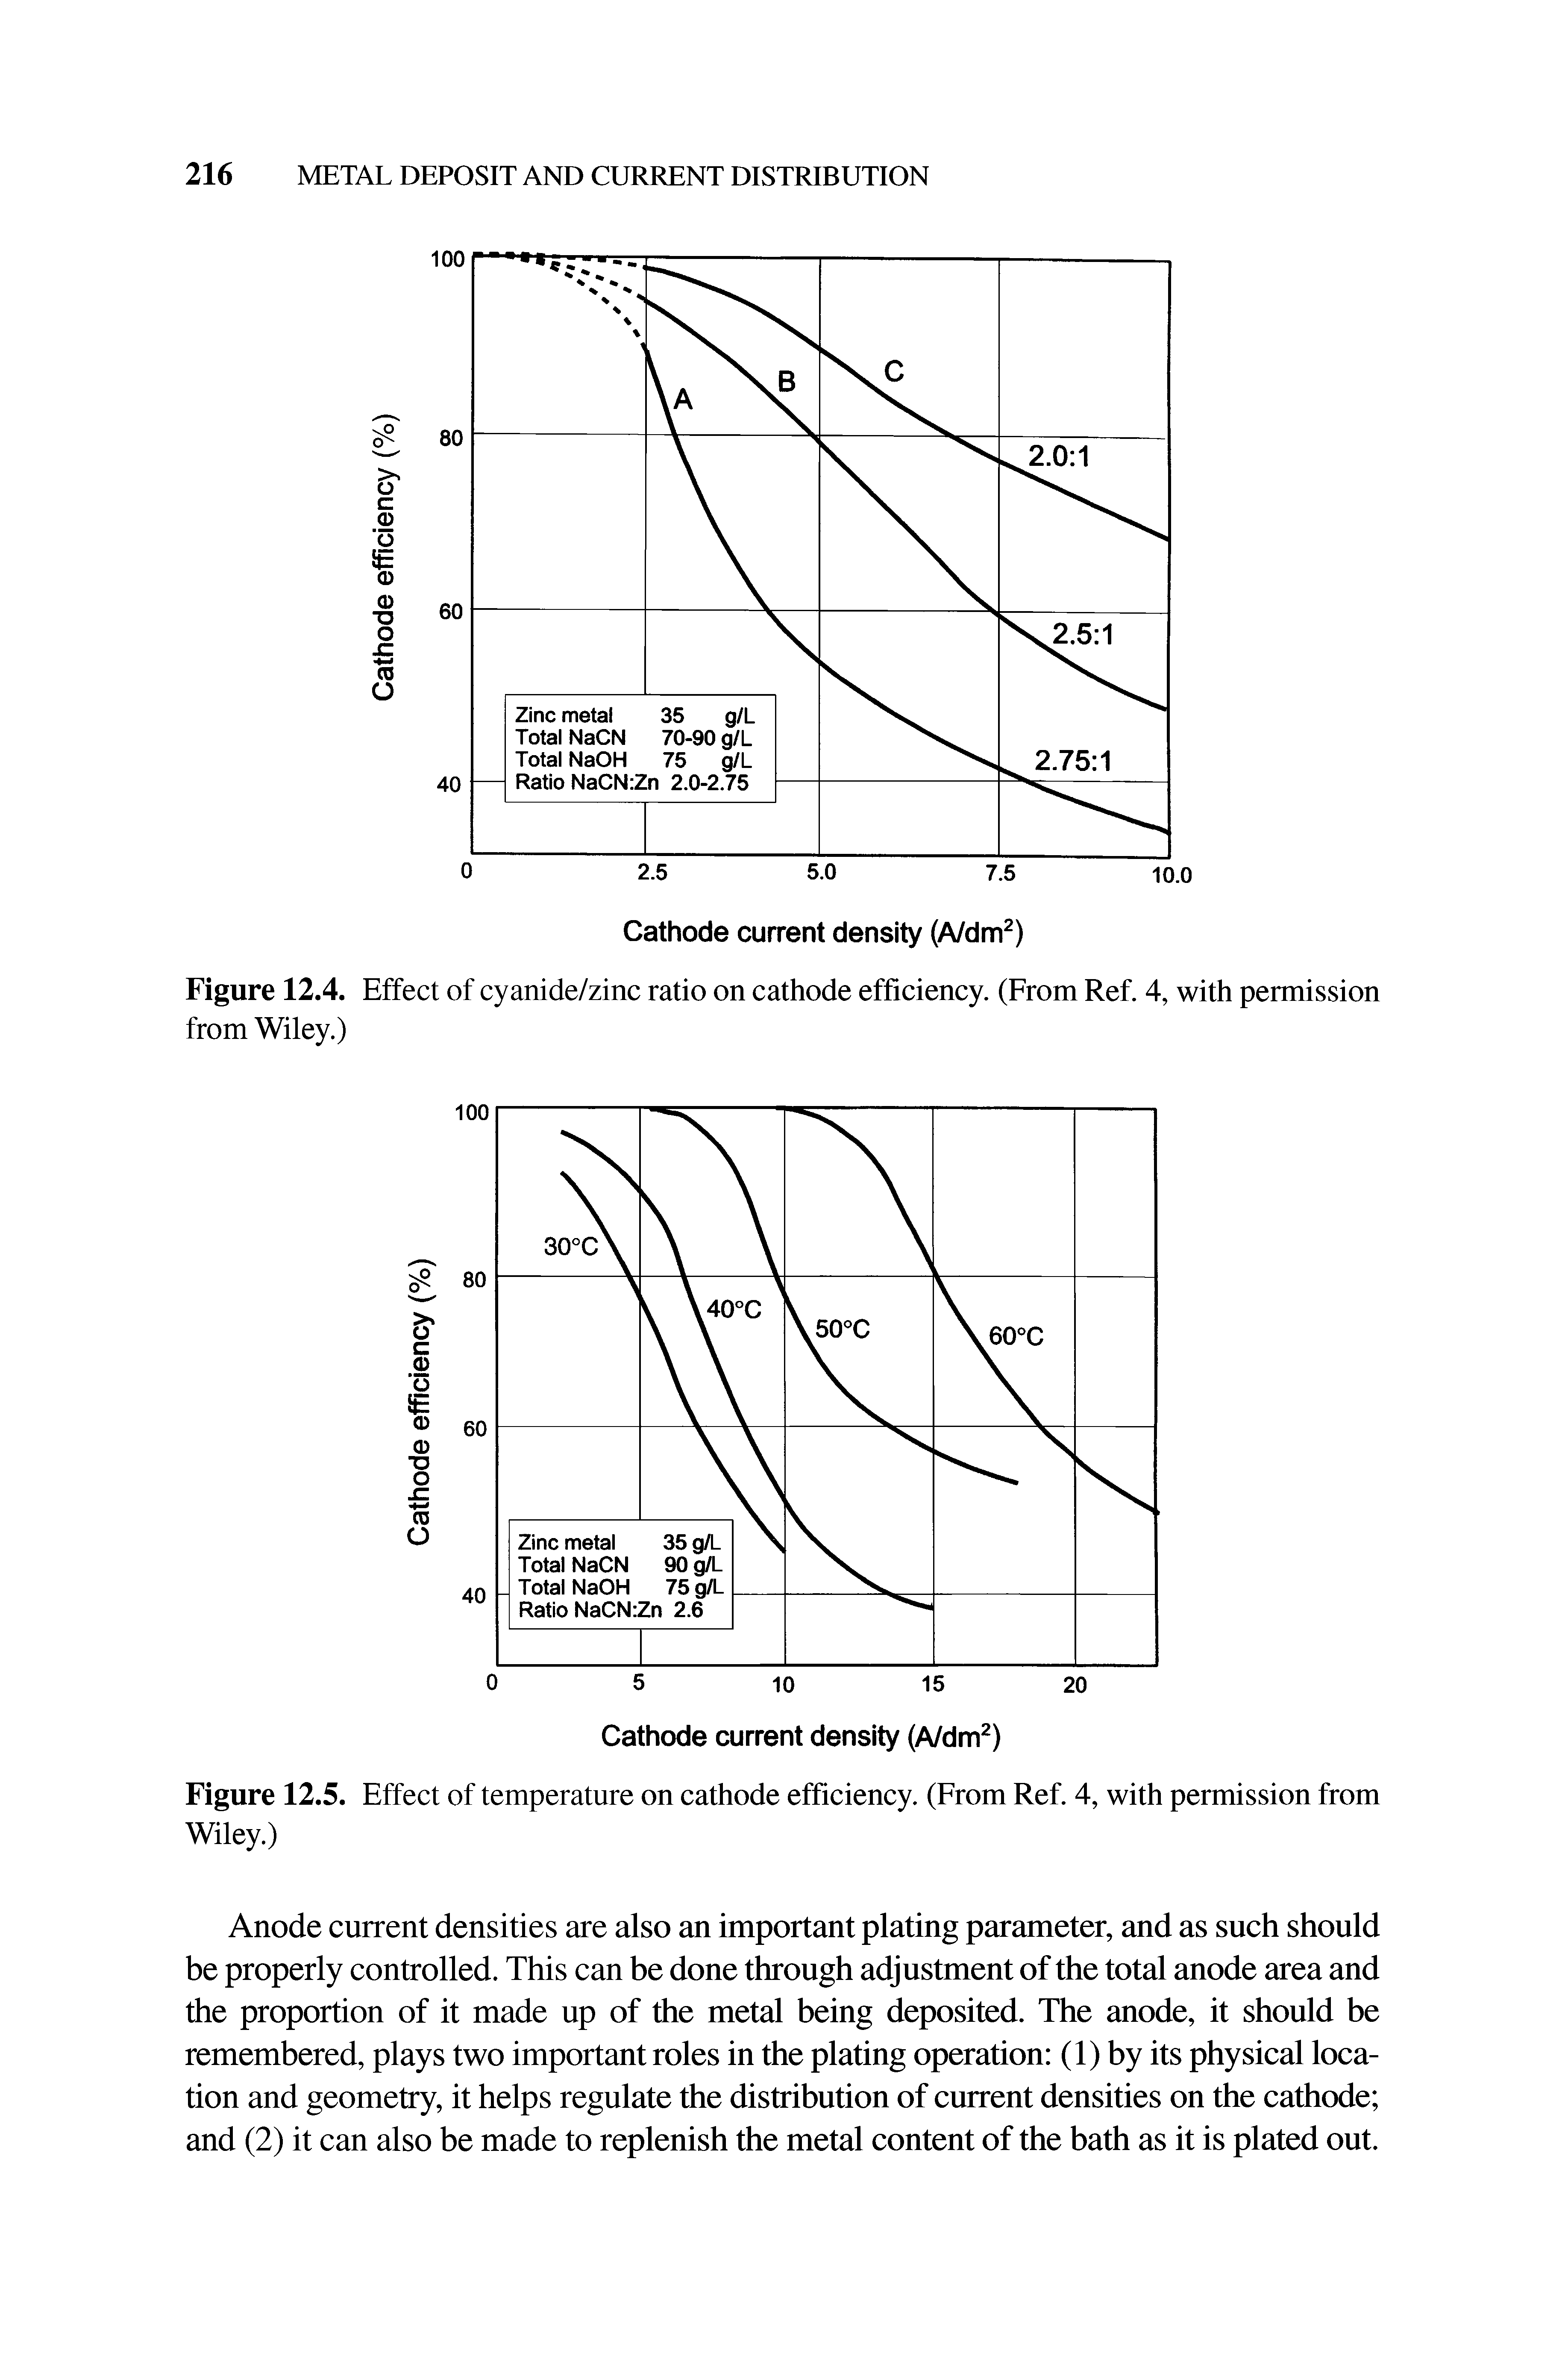 Figure 12.4. Effect of cyanide/zinc ratio on cathode efficiency. (From Ref. 4, with permission from Wiley.)...